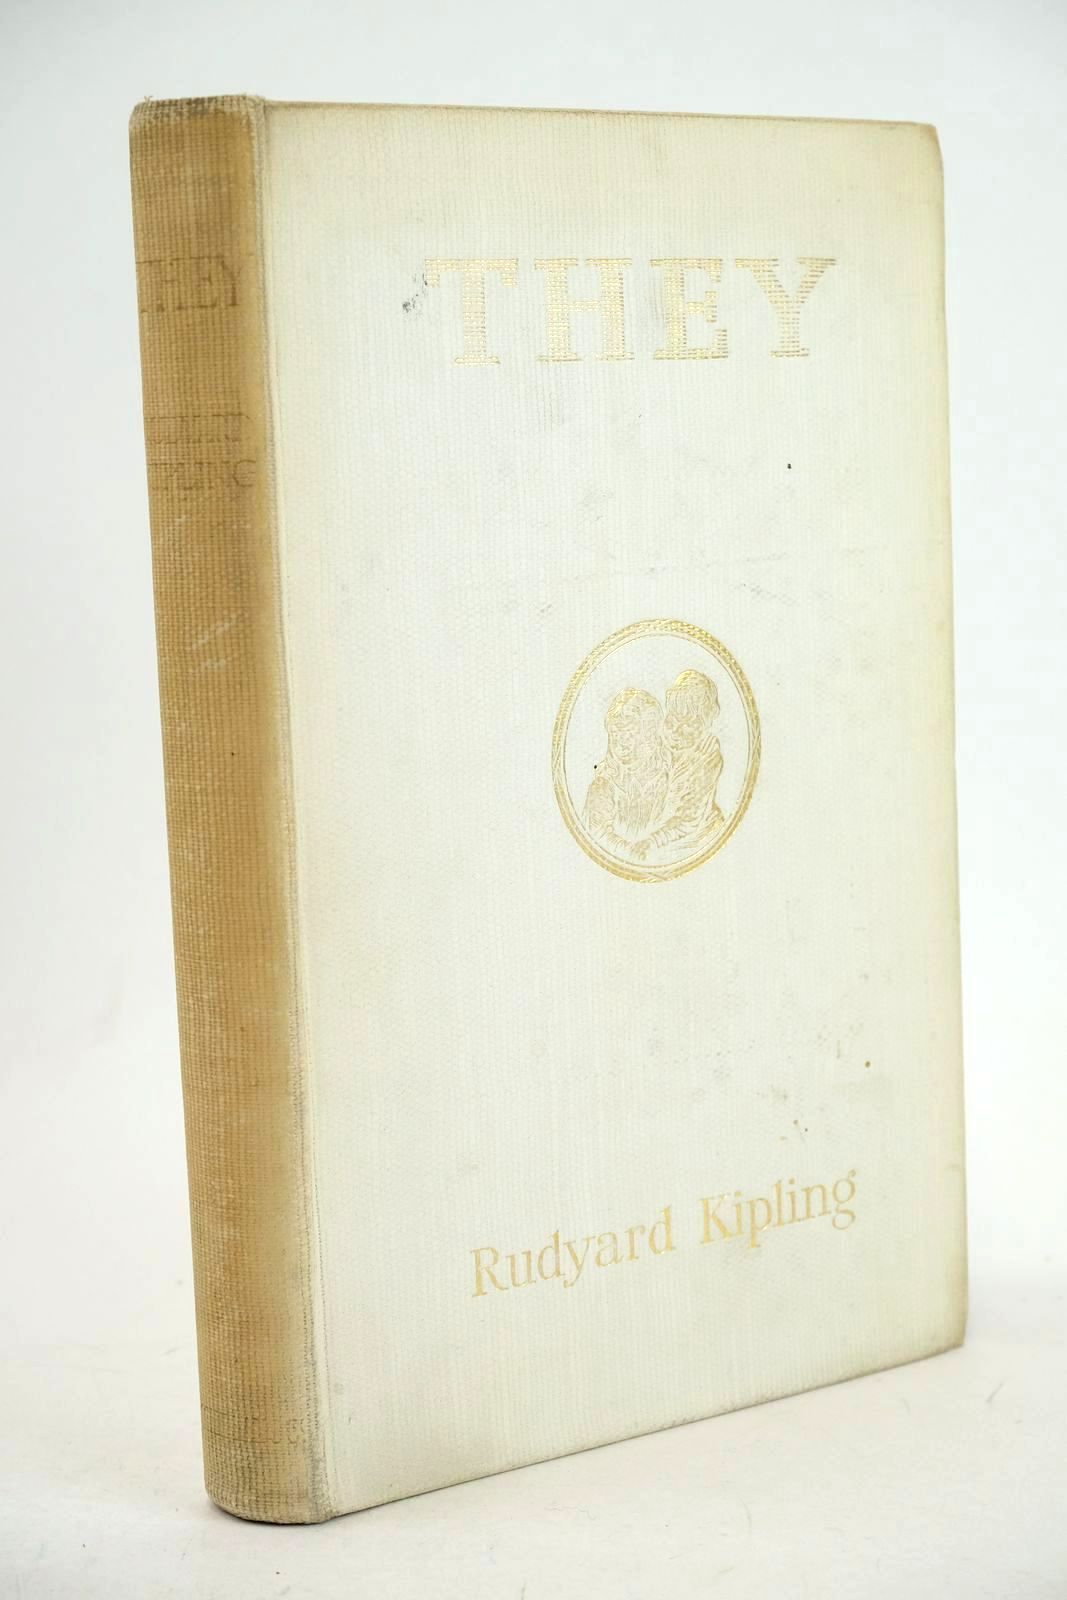 Photo of THEY written by Kipling, Rudyard illustrated by Townsend, F.H. published by Macmillan &amp; Co. Ltd. (STOCK CODE: 1326840)  for sale by Stella & Rose's Books